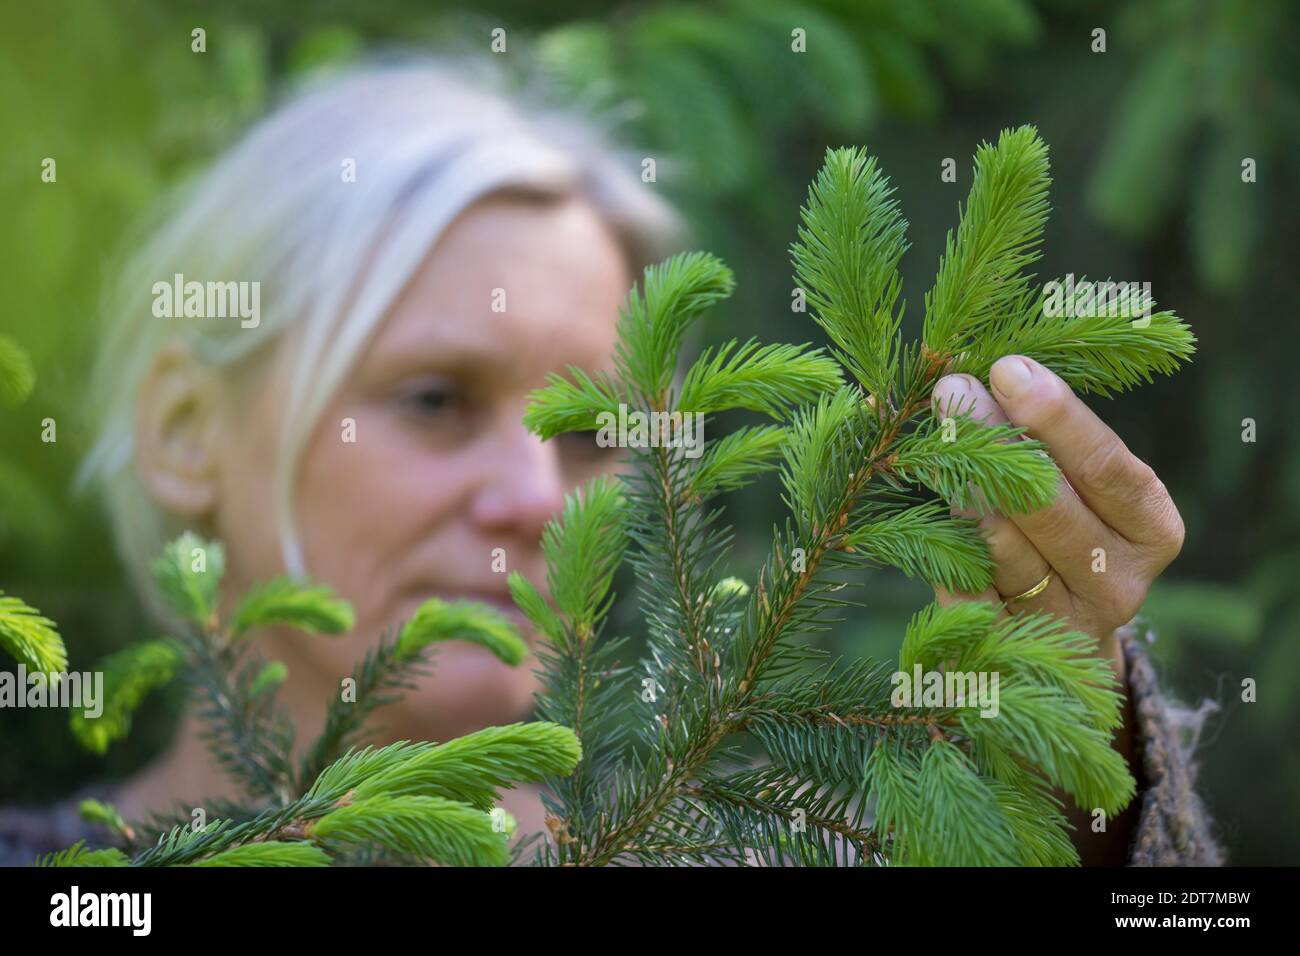 Norway spruce (Picea abies), fresh young sprouts of spruce are collected, Germany Stock Photo